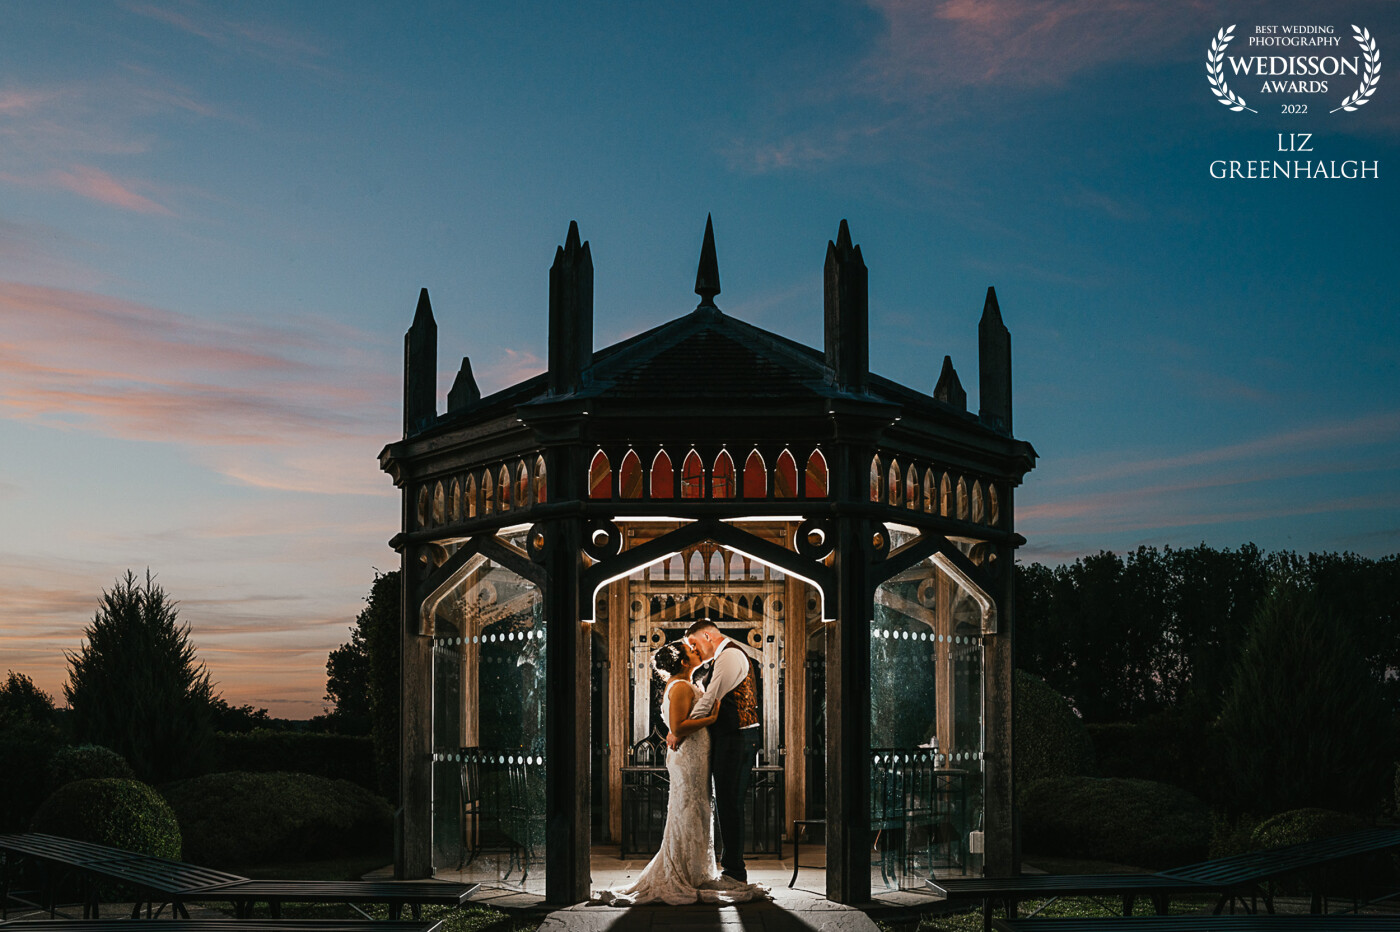 A stolen moment as the sun sets over the Pavillion at The Old Hall Ely for Natalie and Adam. Capturing an evening shot is a great way to end a perfect day